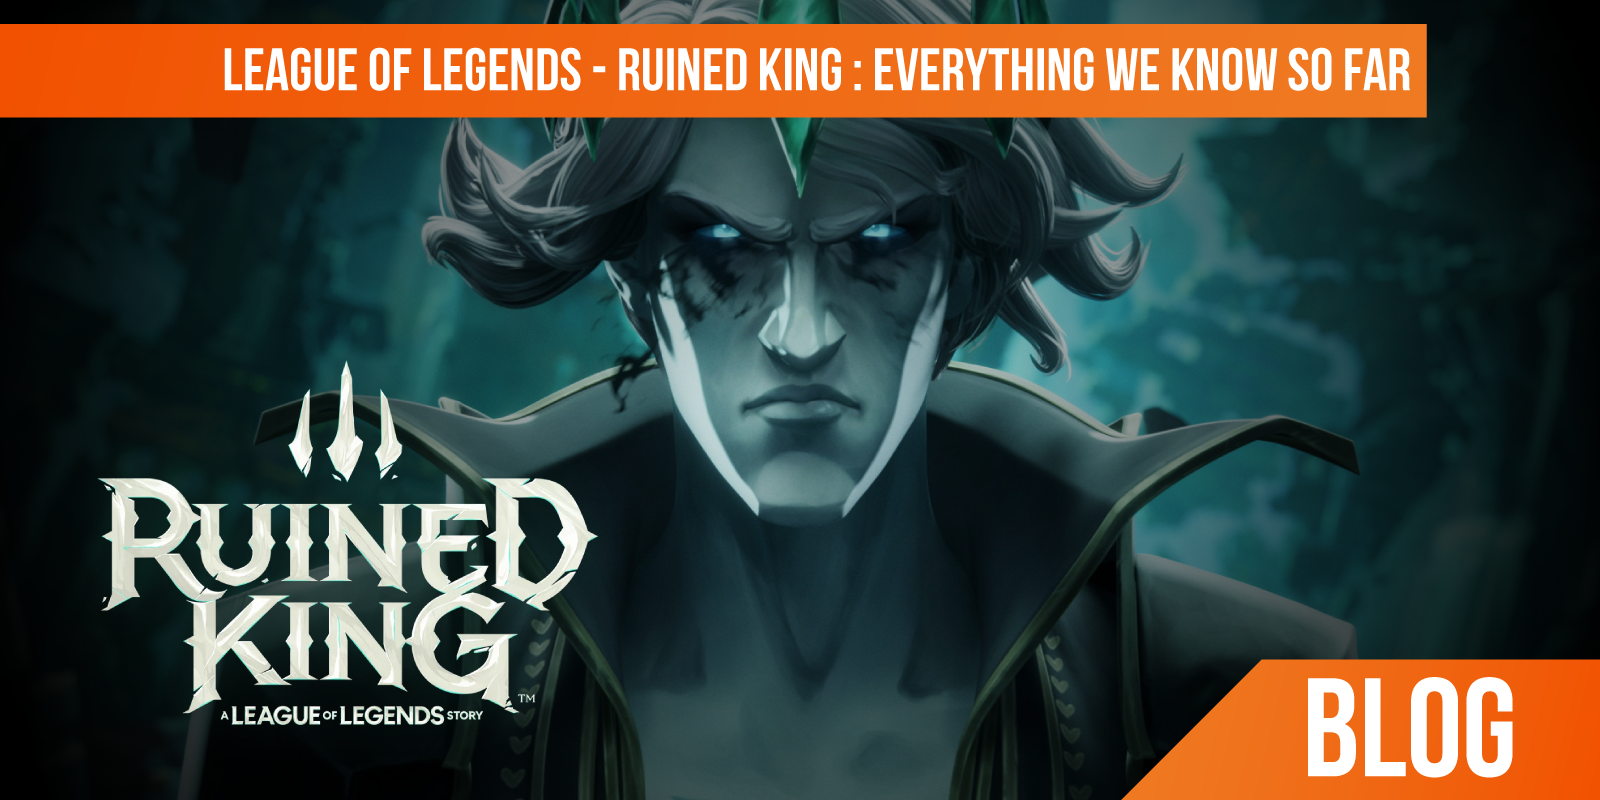 Could the Ruined King become the new League of Legends champion?